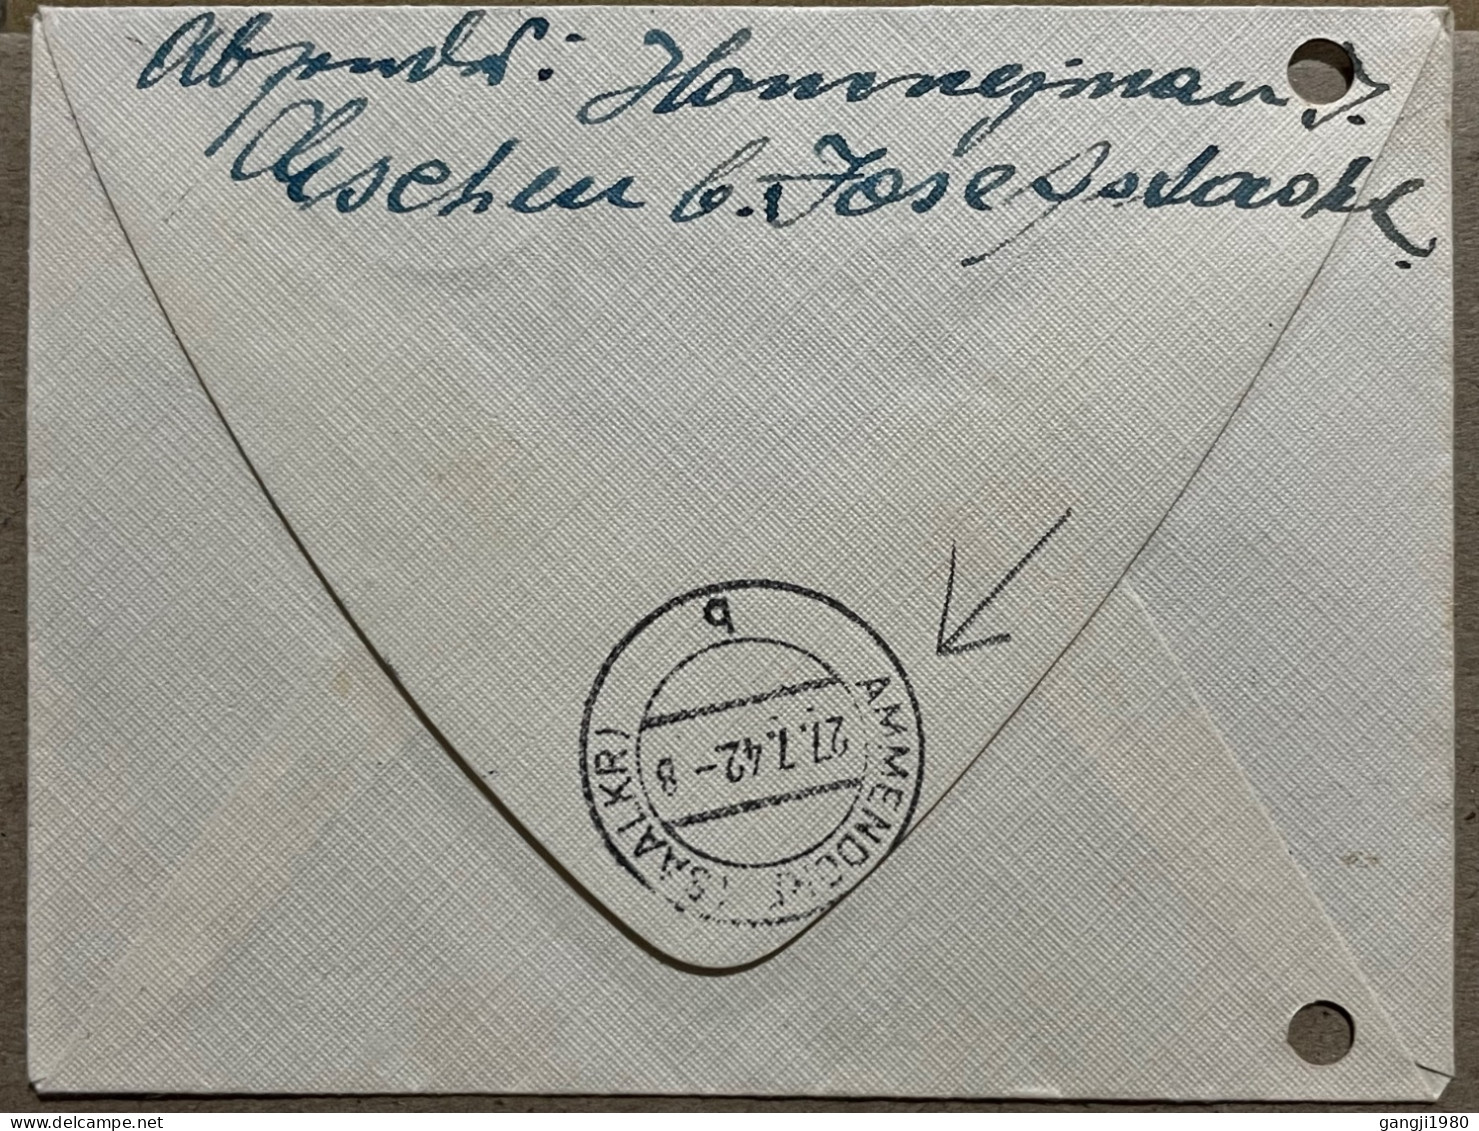 BOHEMIA & MORAVIA 1942, REGISTER COVER USED TO GERMANY,  ESCHEN JASENNA & UMMENDORF CITY CANCEL. - Covers & Documents